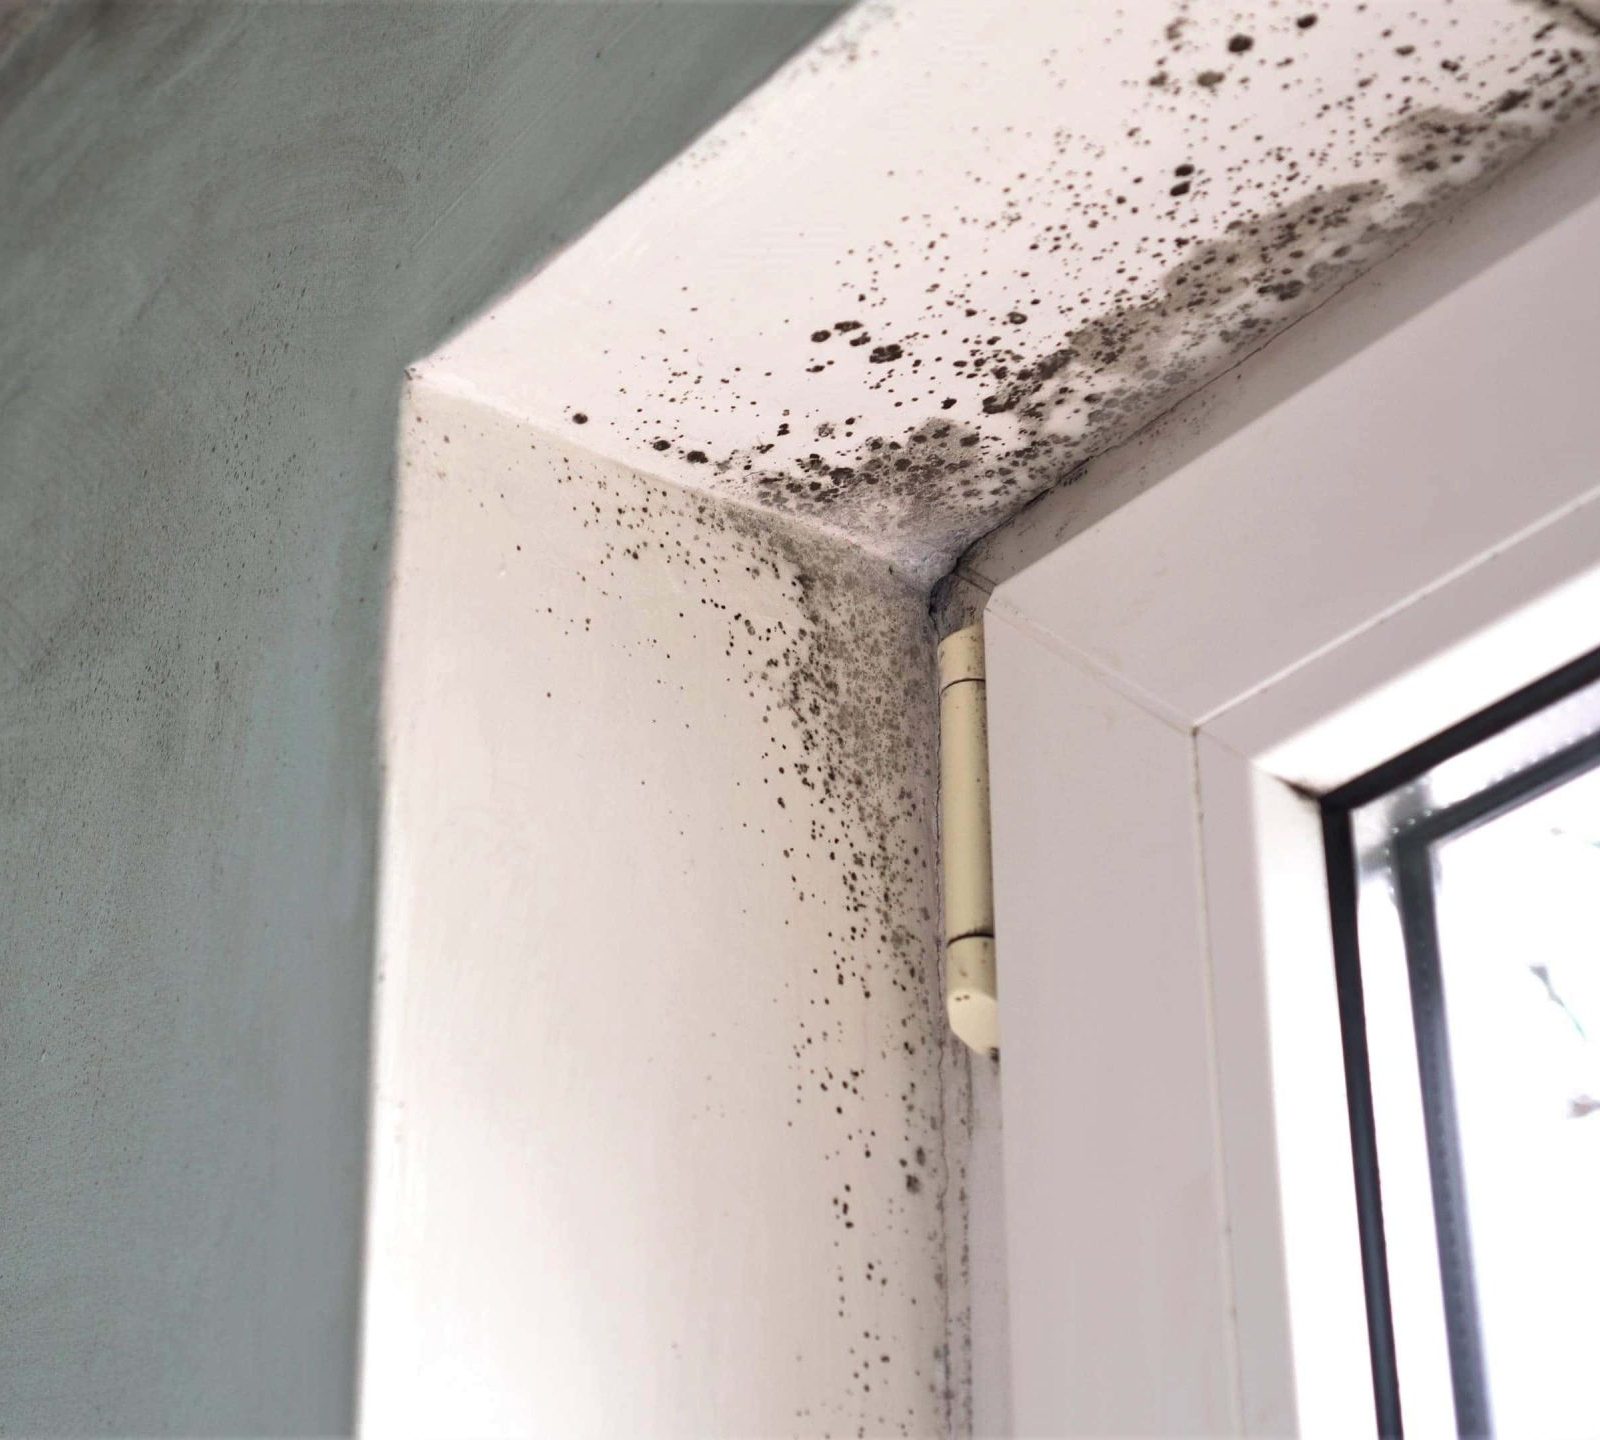 Trivallis Housing Landlord Wales Housing mould growth observed in the corner of a room where the ceiling meets the walls, near a window frame. Reporting damp and mould can prevent these problems.